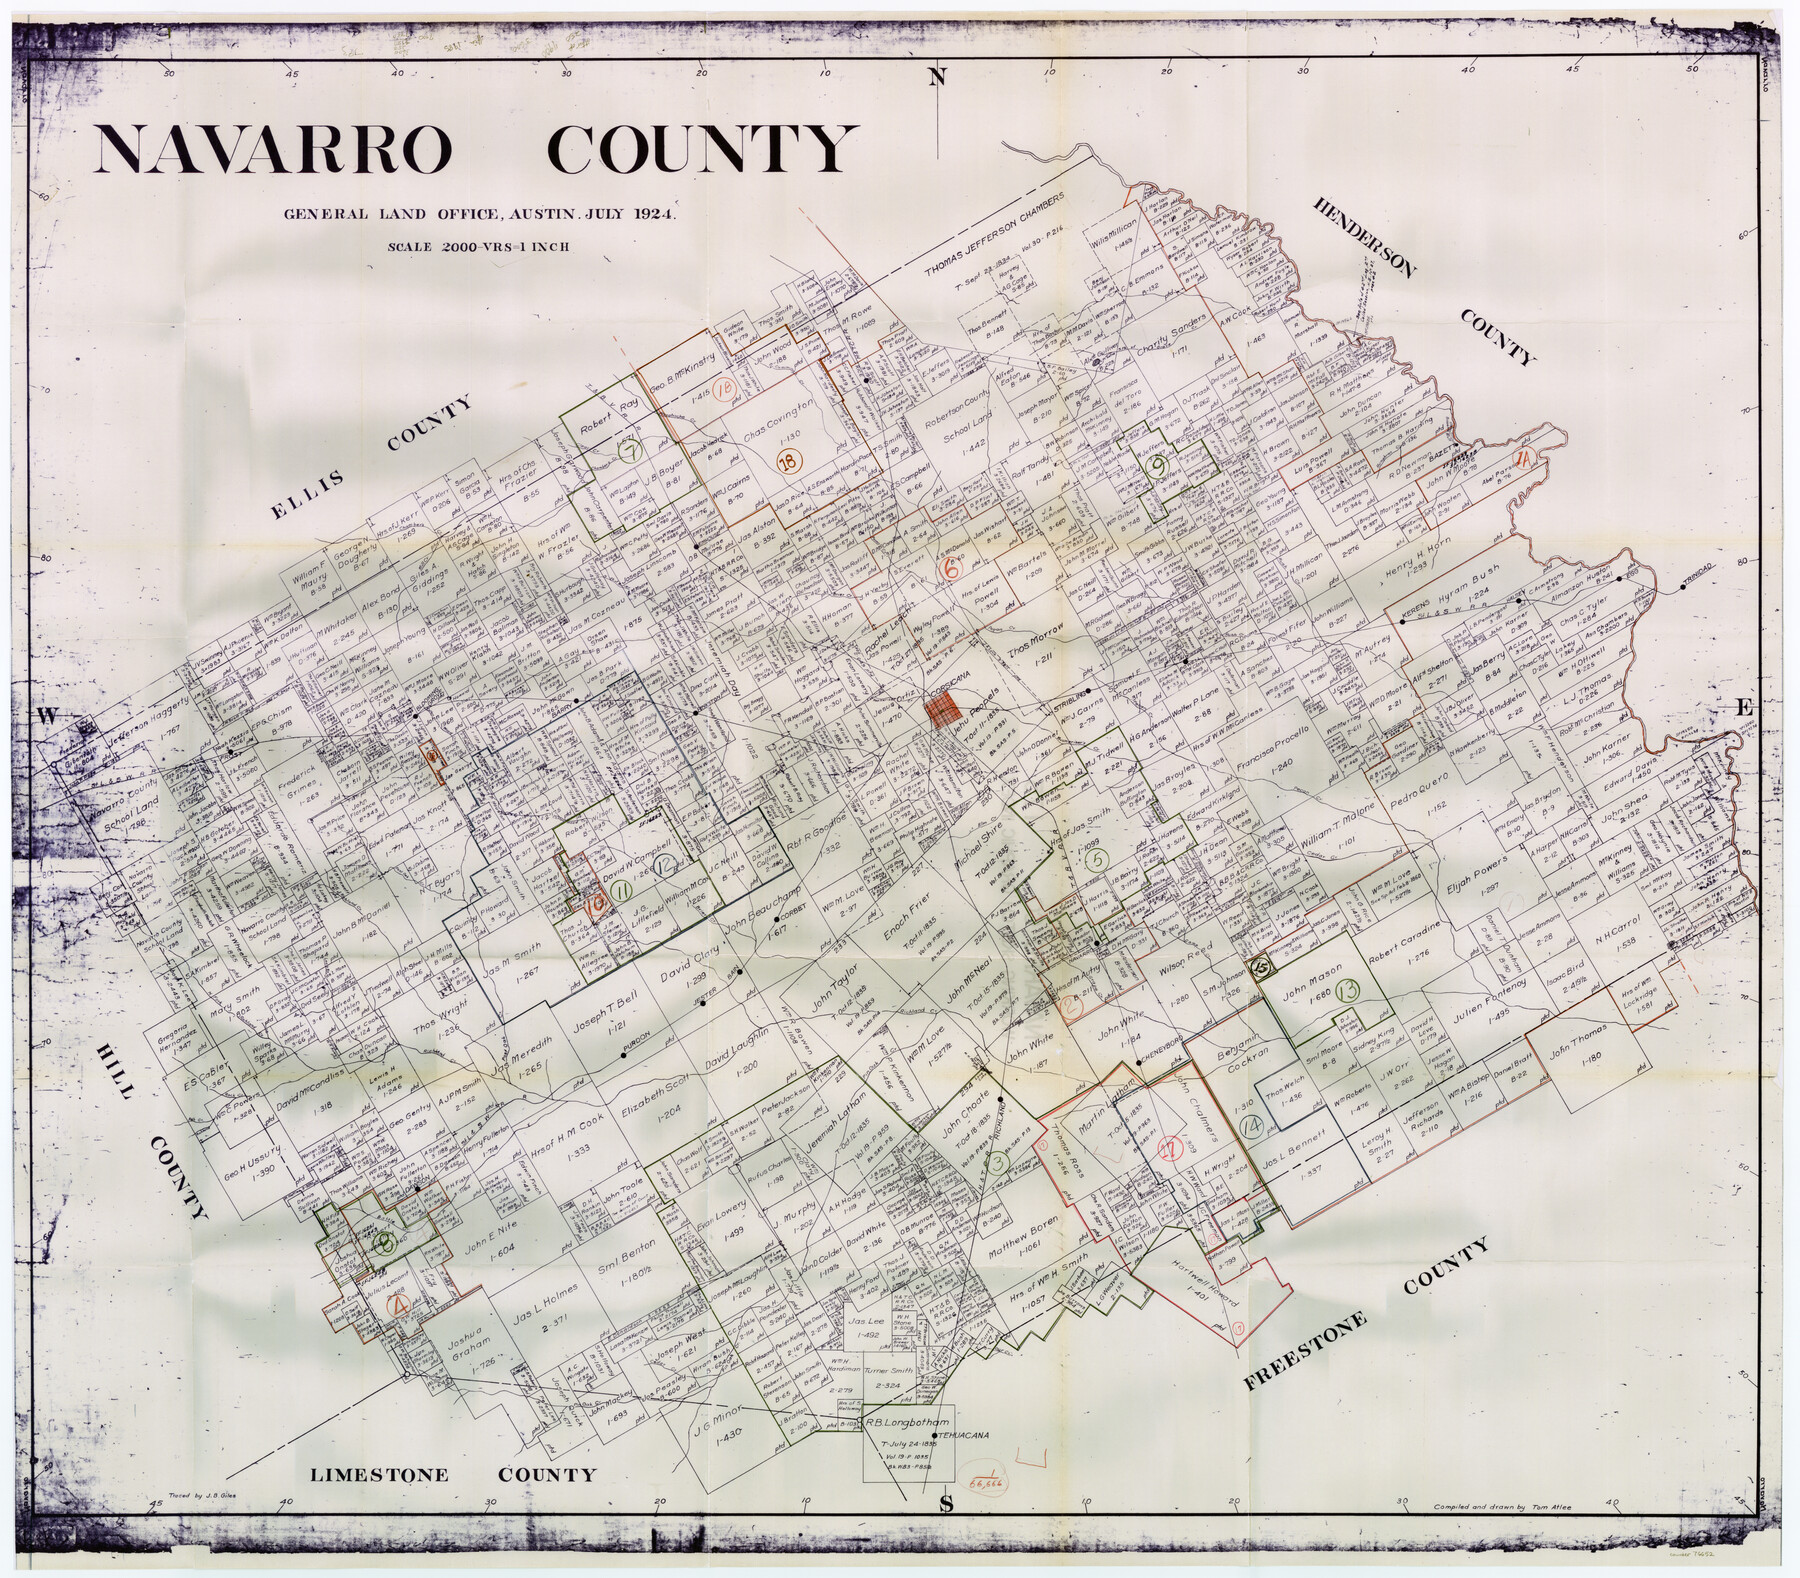 76652, Navarro County Working Sketch Graphic Index, General Map Collection